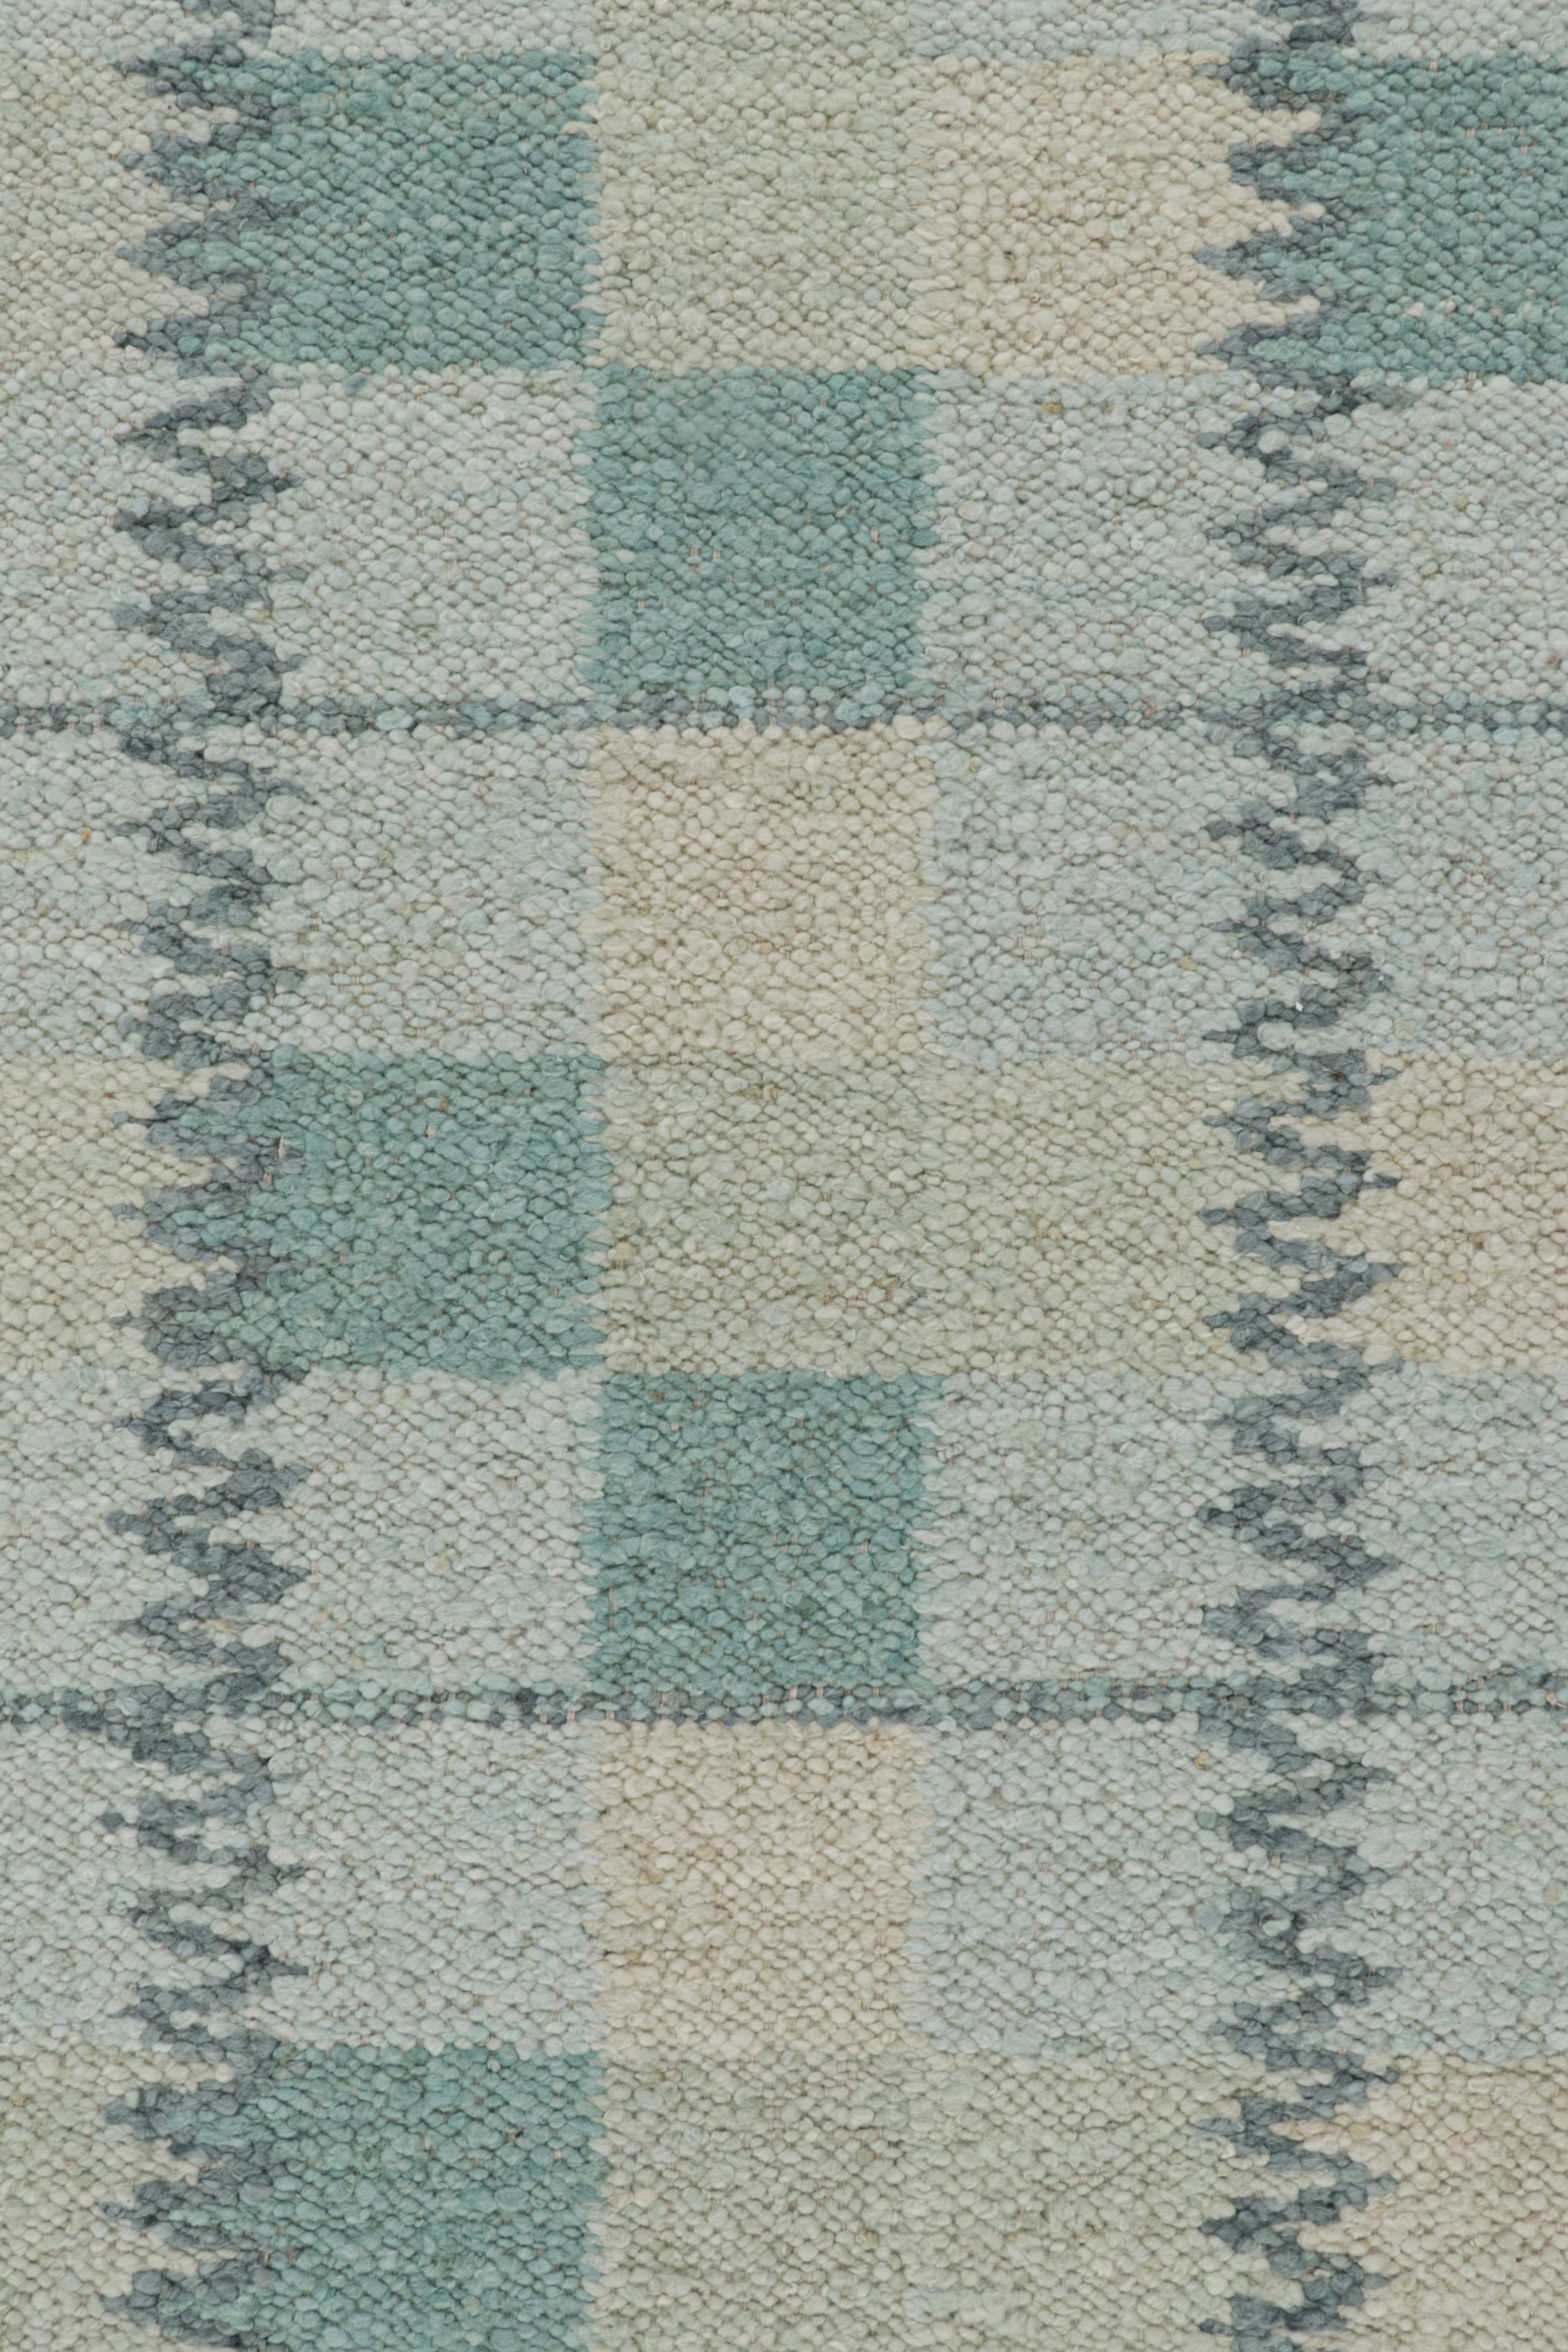 Modern Rug & Kilim’s Scandinavian Style Rug in Teal Blue Tones with Geometric Patterns For Sale